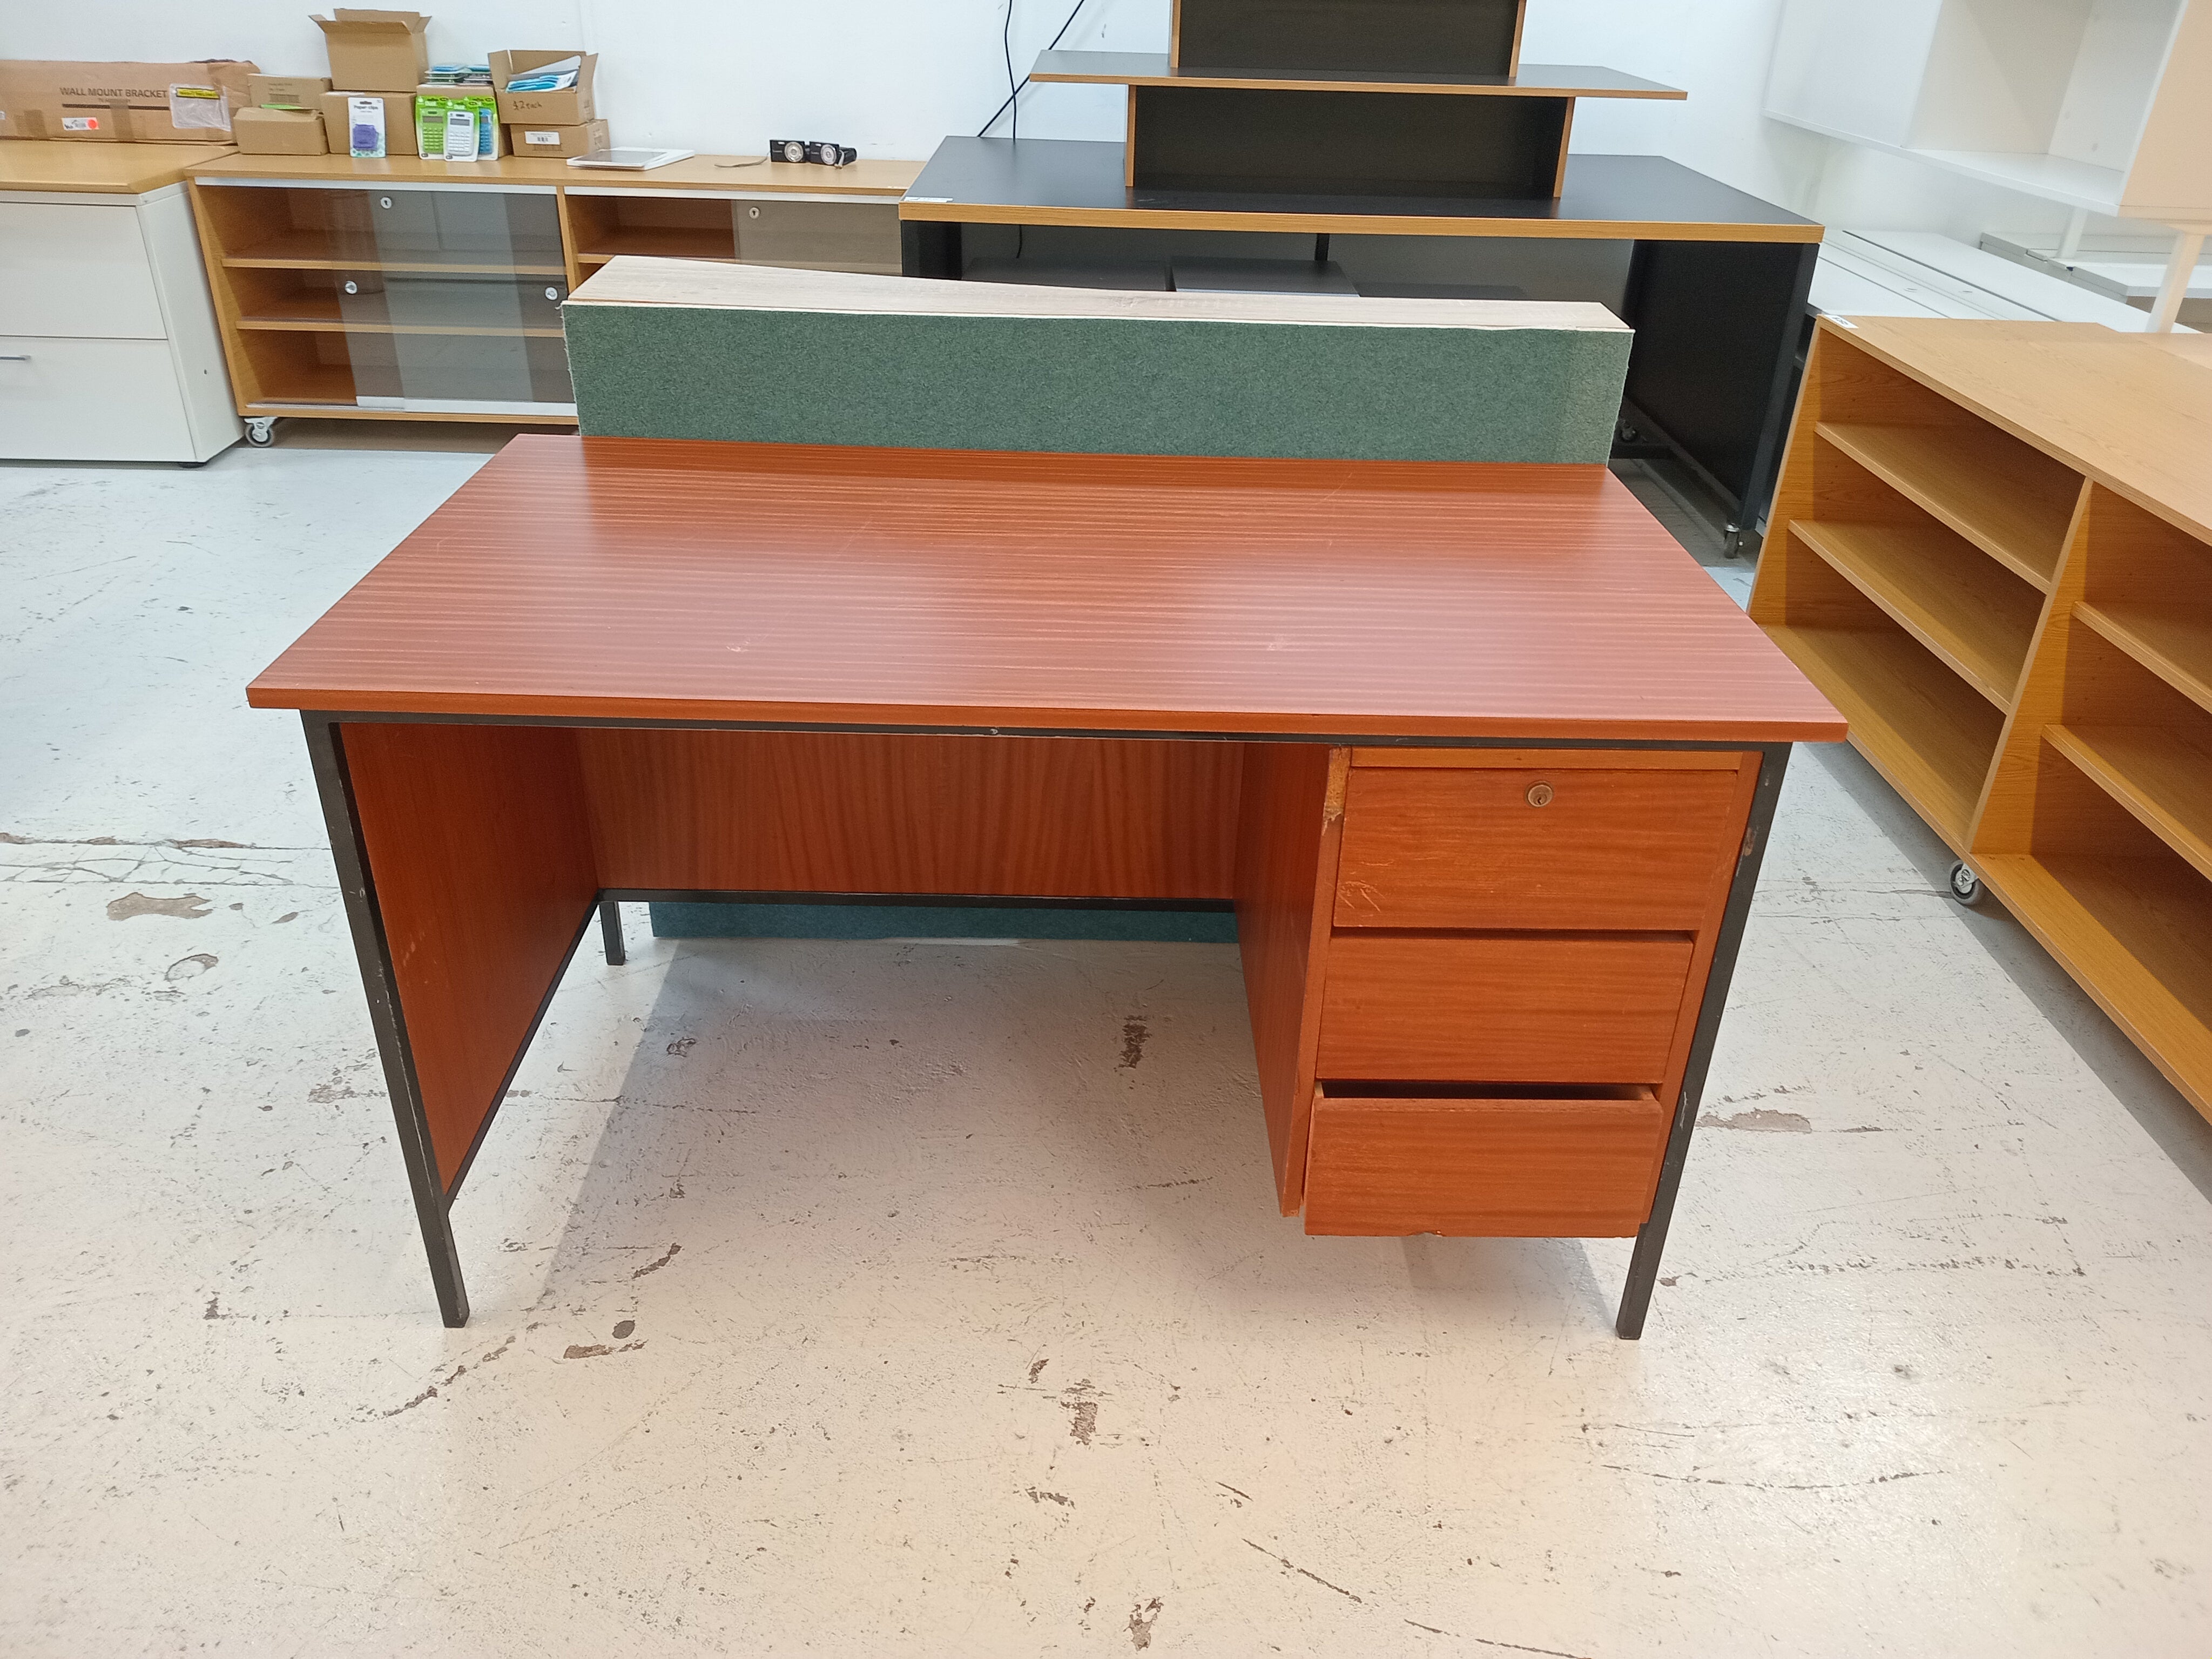 Brown, wood-like desk with drawers